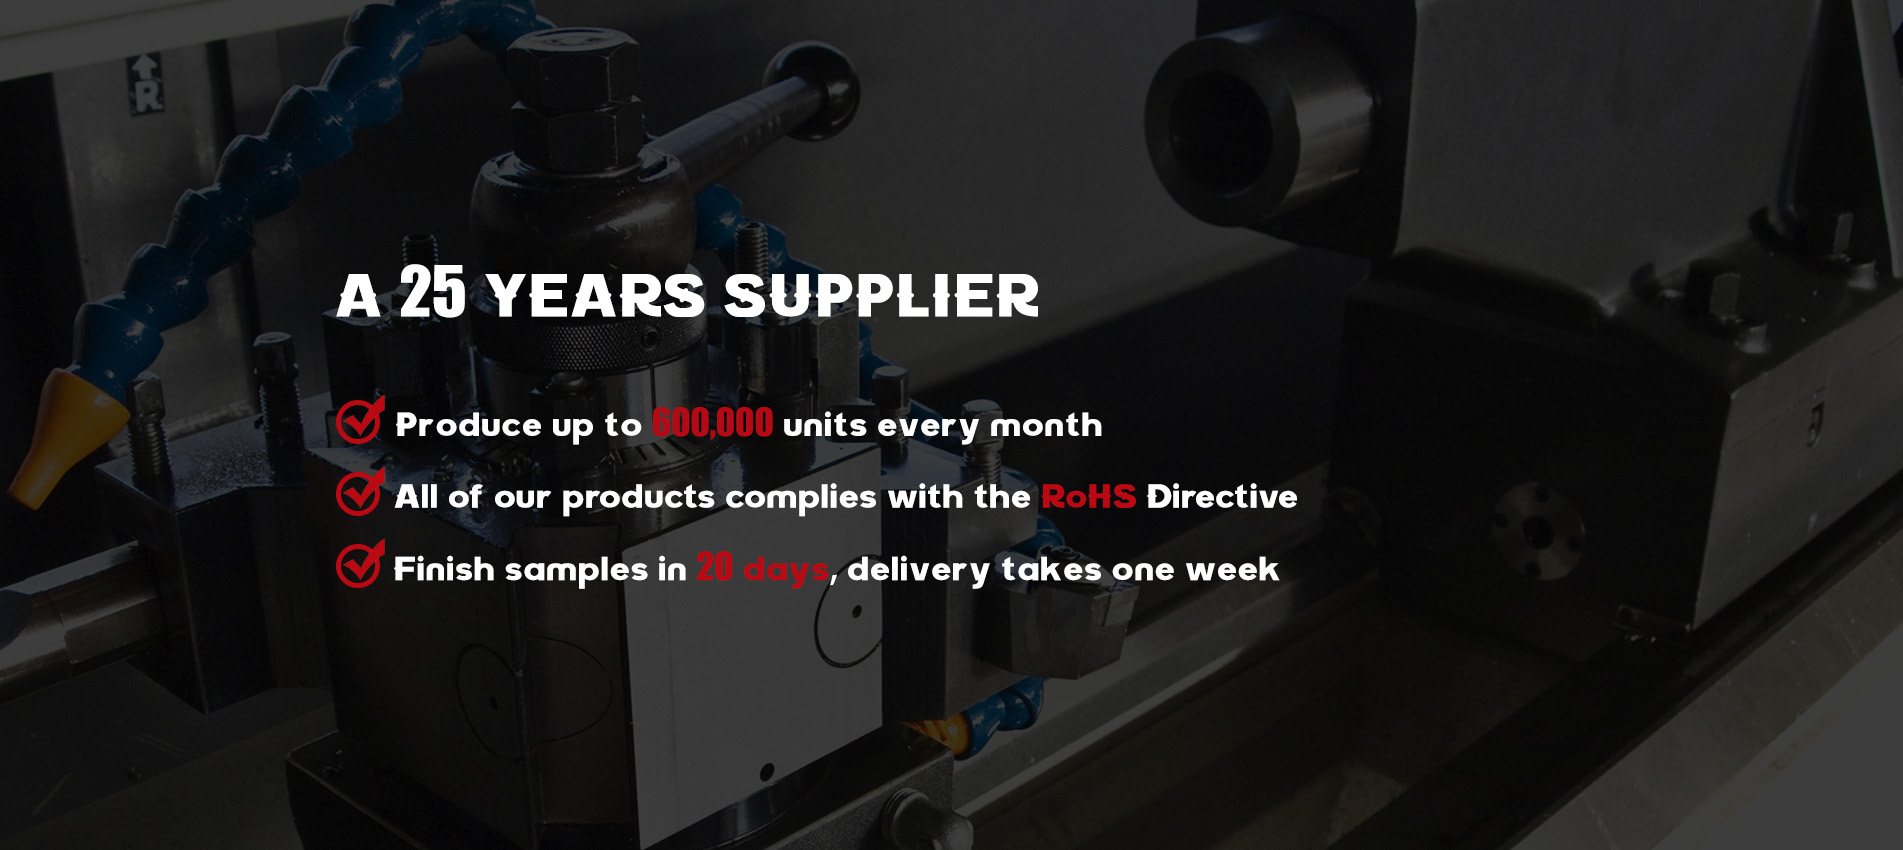 A 25 YEARS SUPPLIER